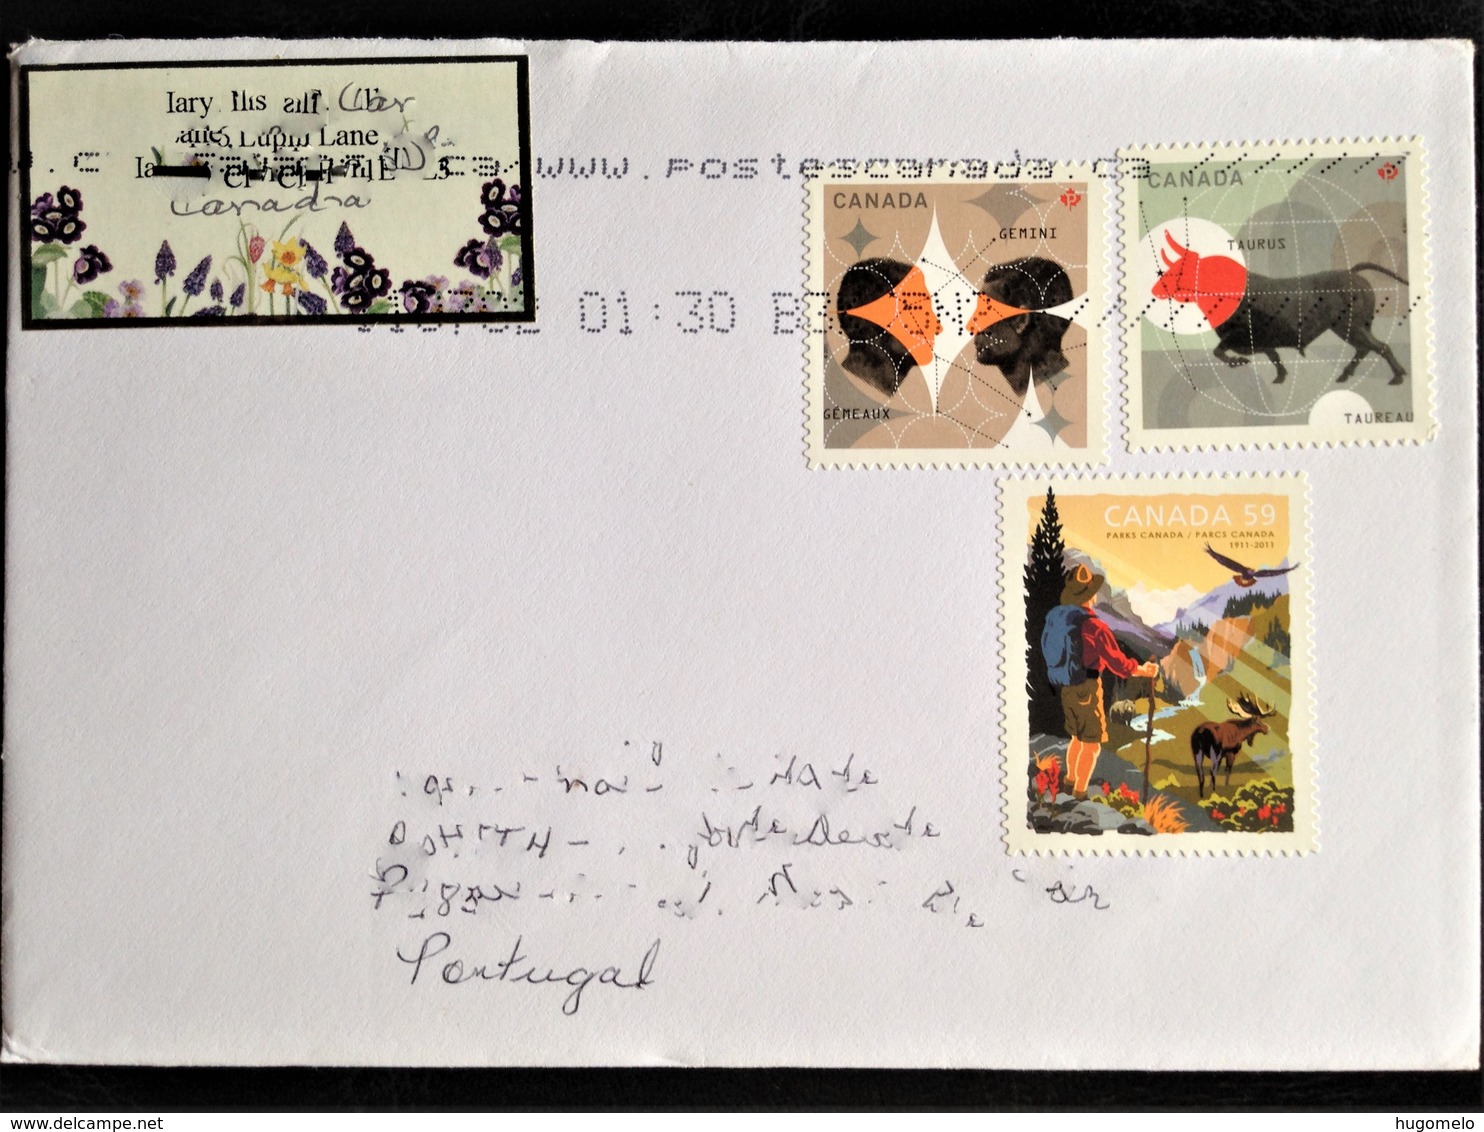 Canada, Circulated Cover To Portugal, "Signs Of The Zodiac", "National Parks", 2011 - Covers & Documents